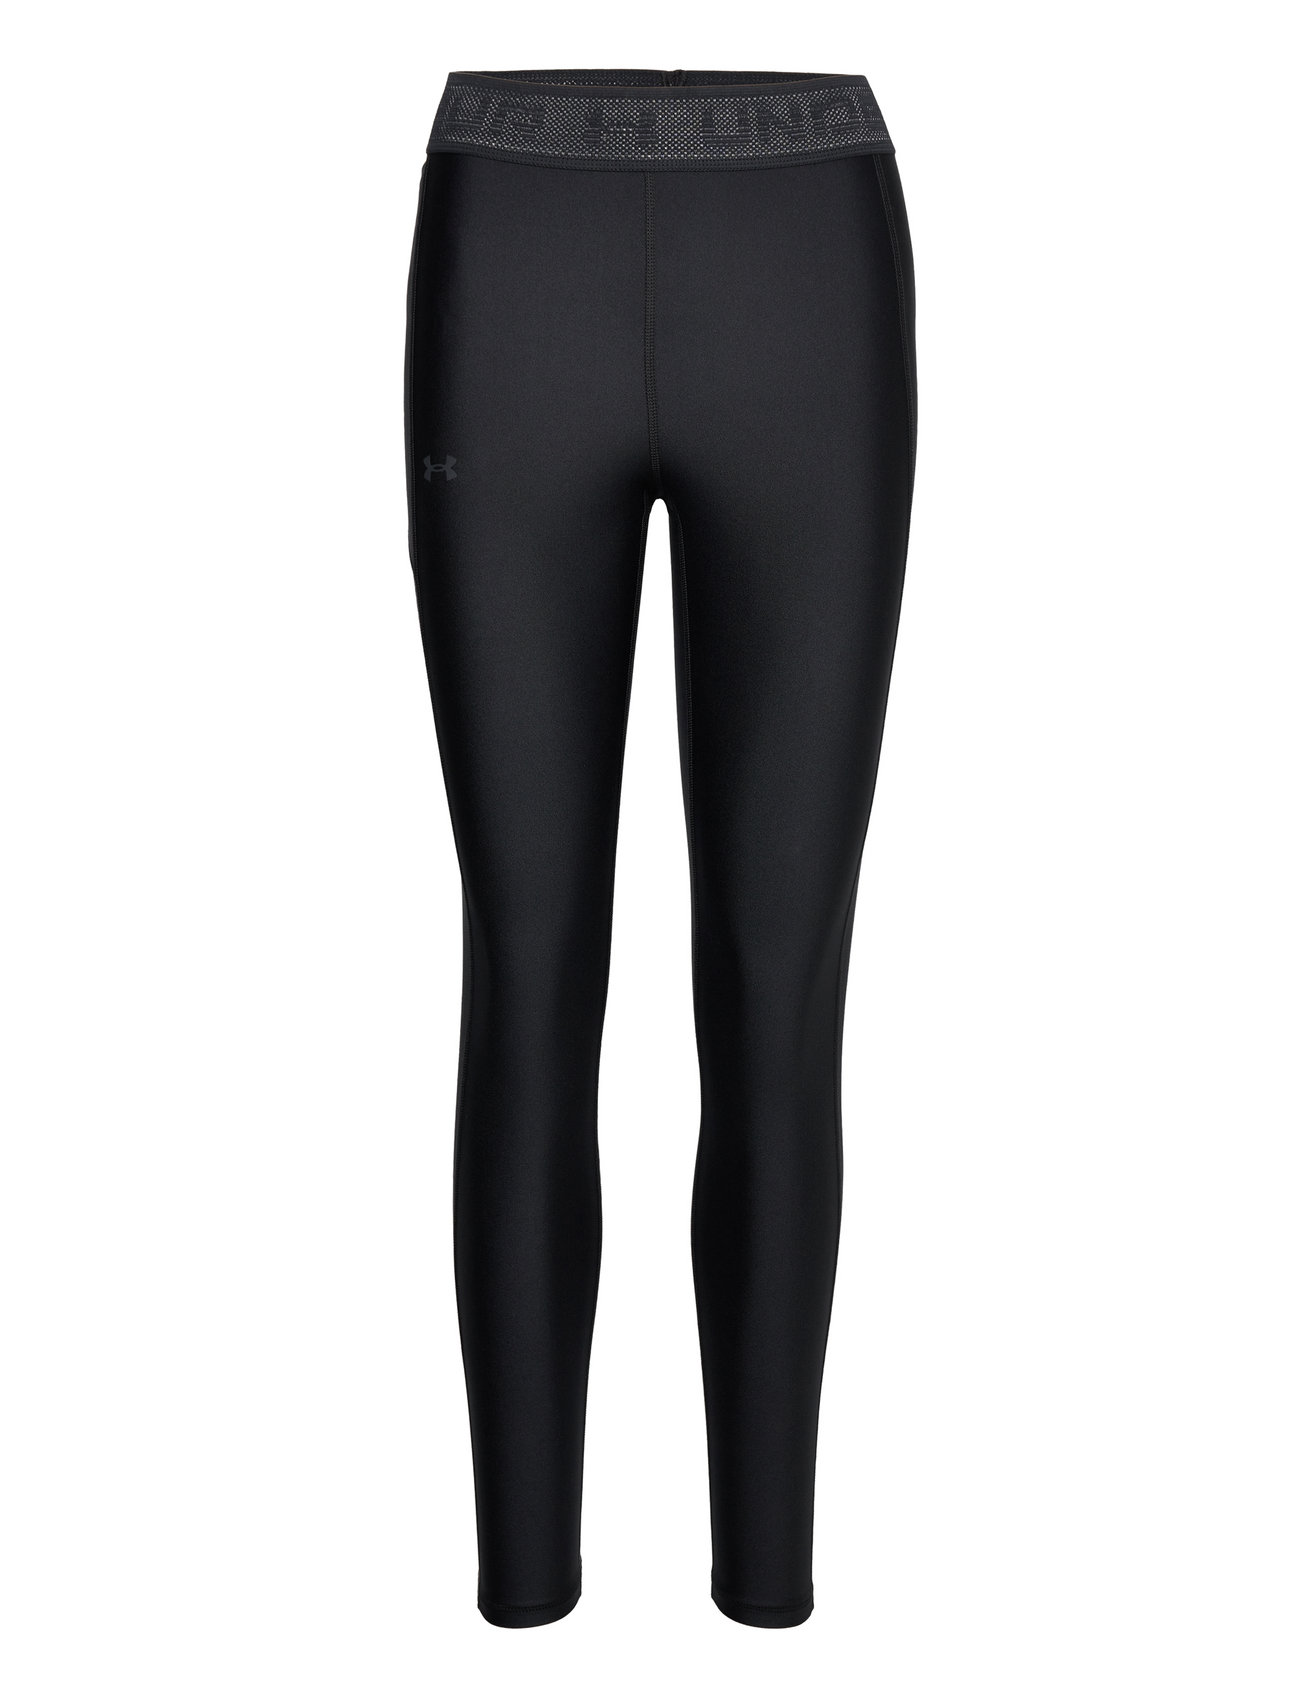 Womens compression 7/8 leggings Under Armour ARMOUR BRANDED WB LEGGING W  black